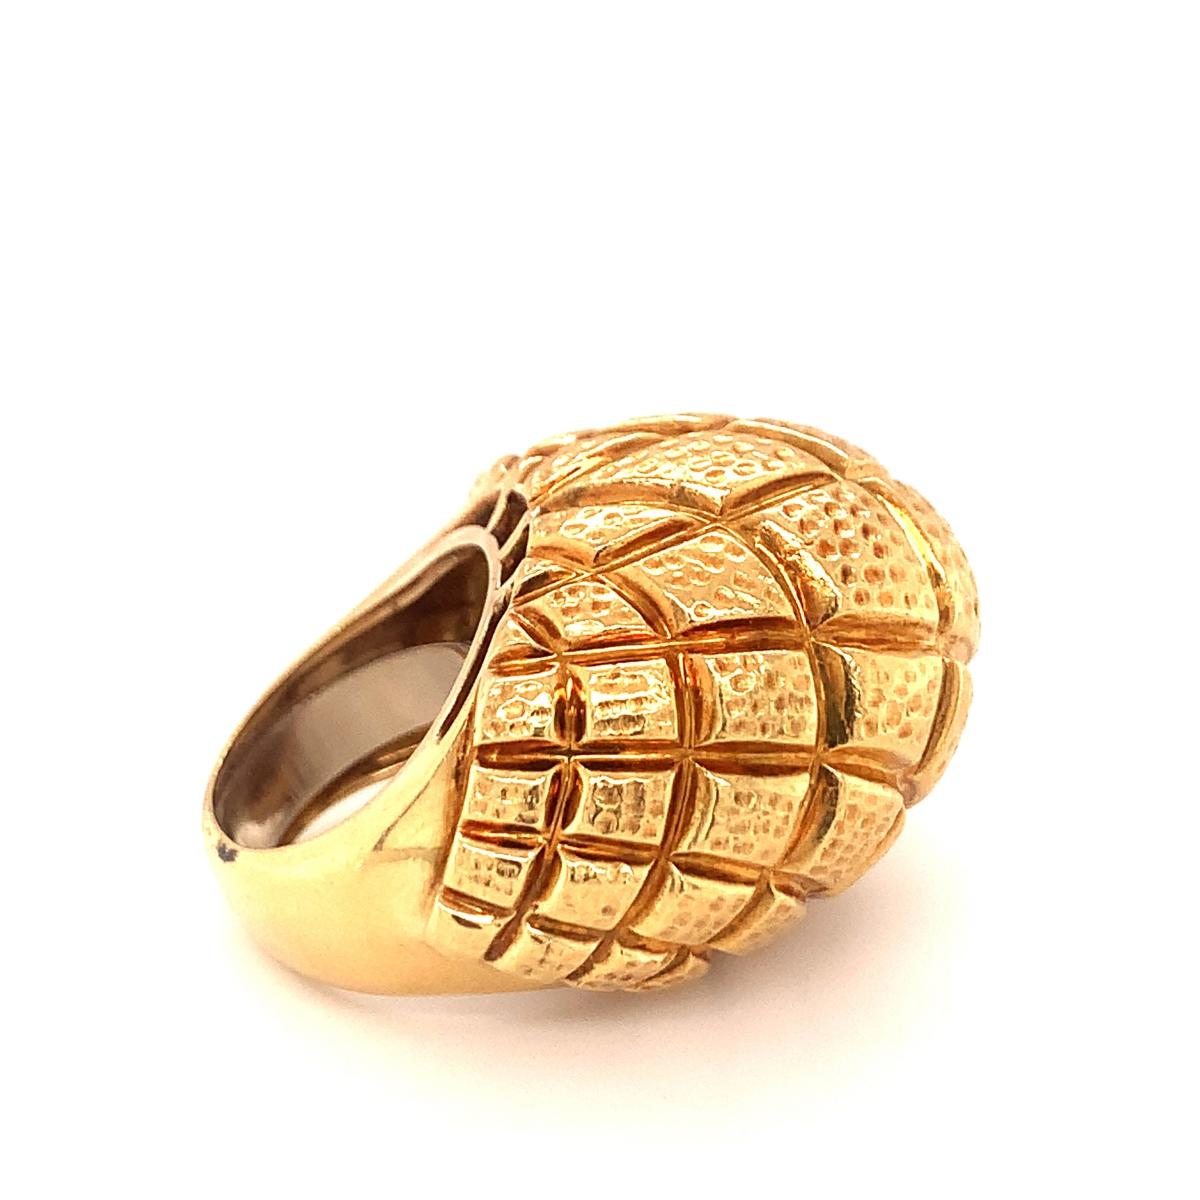 Immense 22K Yellow Gold Dome Ring, circa 1960s For Sale 1